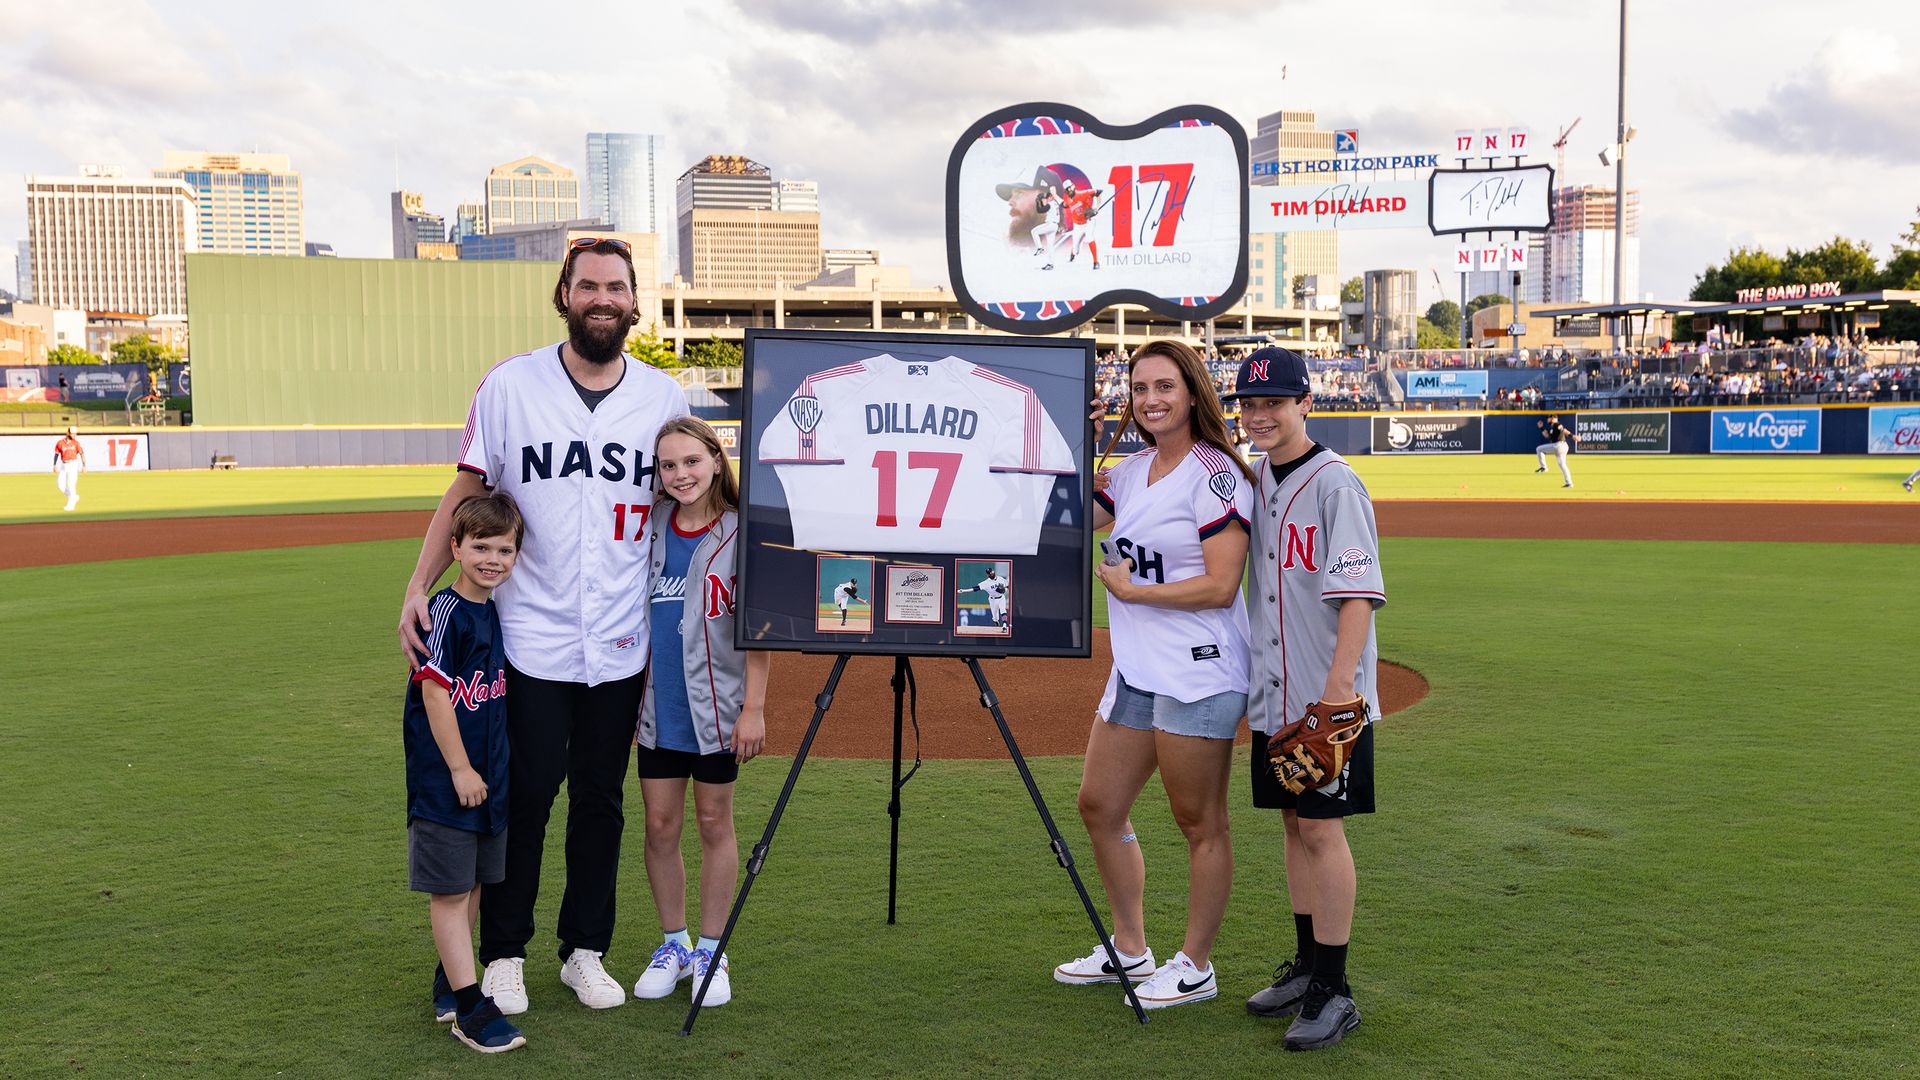 Tim Dillard and family at his jersey retirement ceremony.